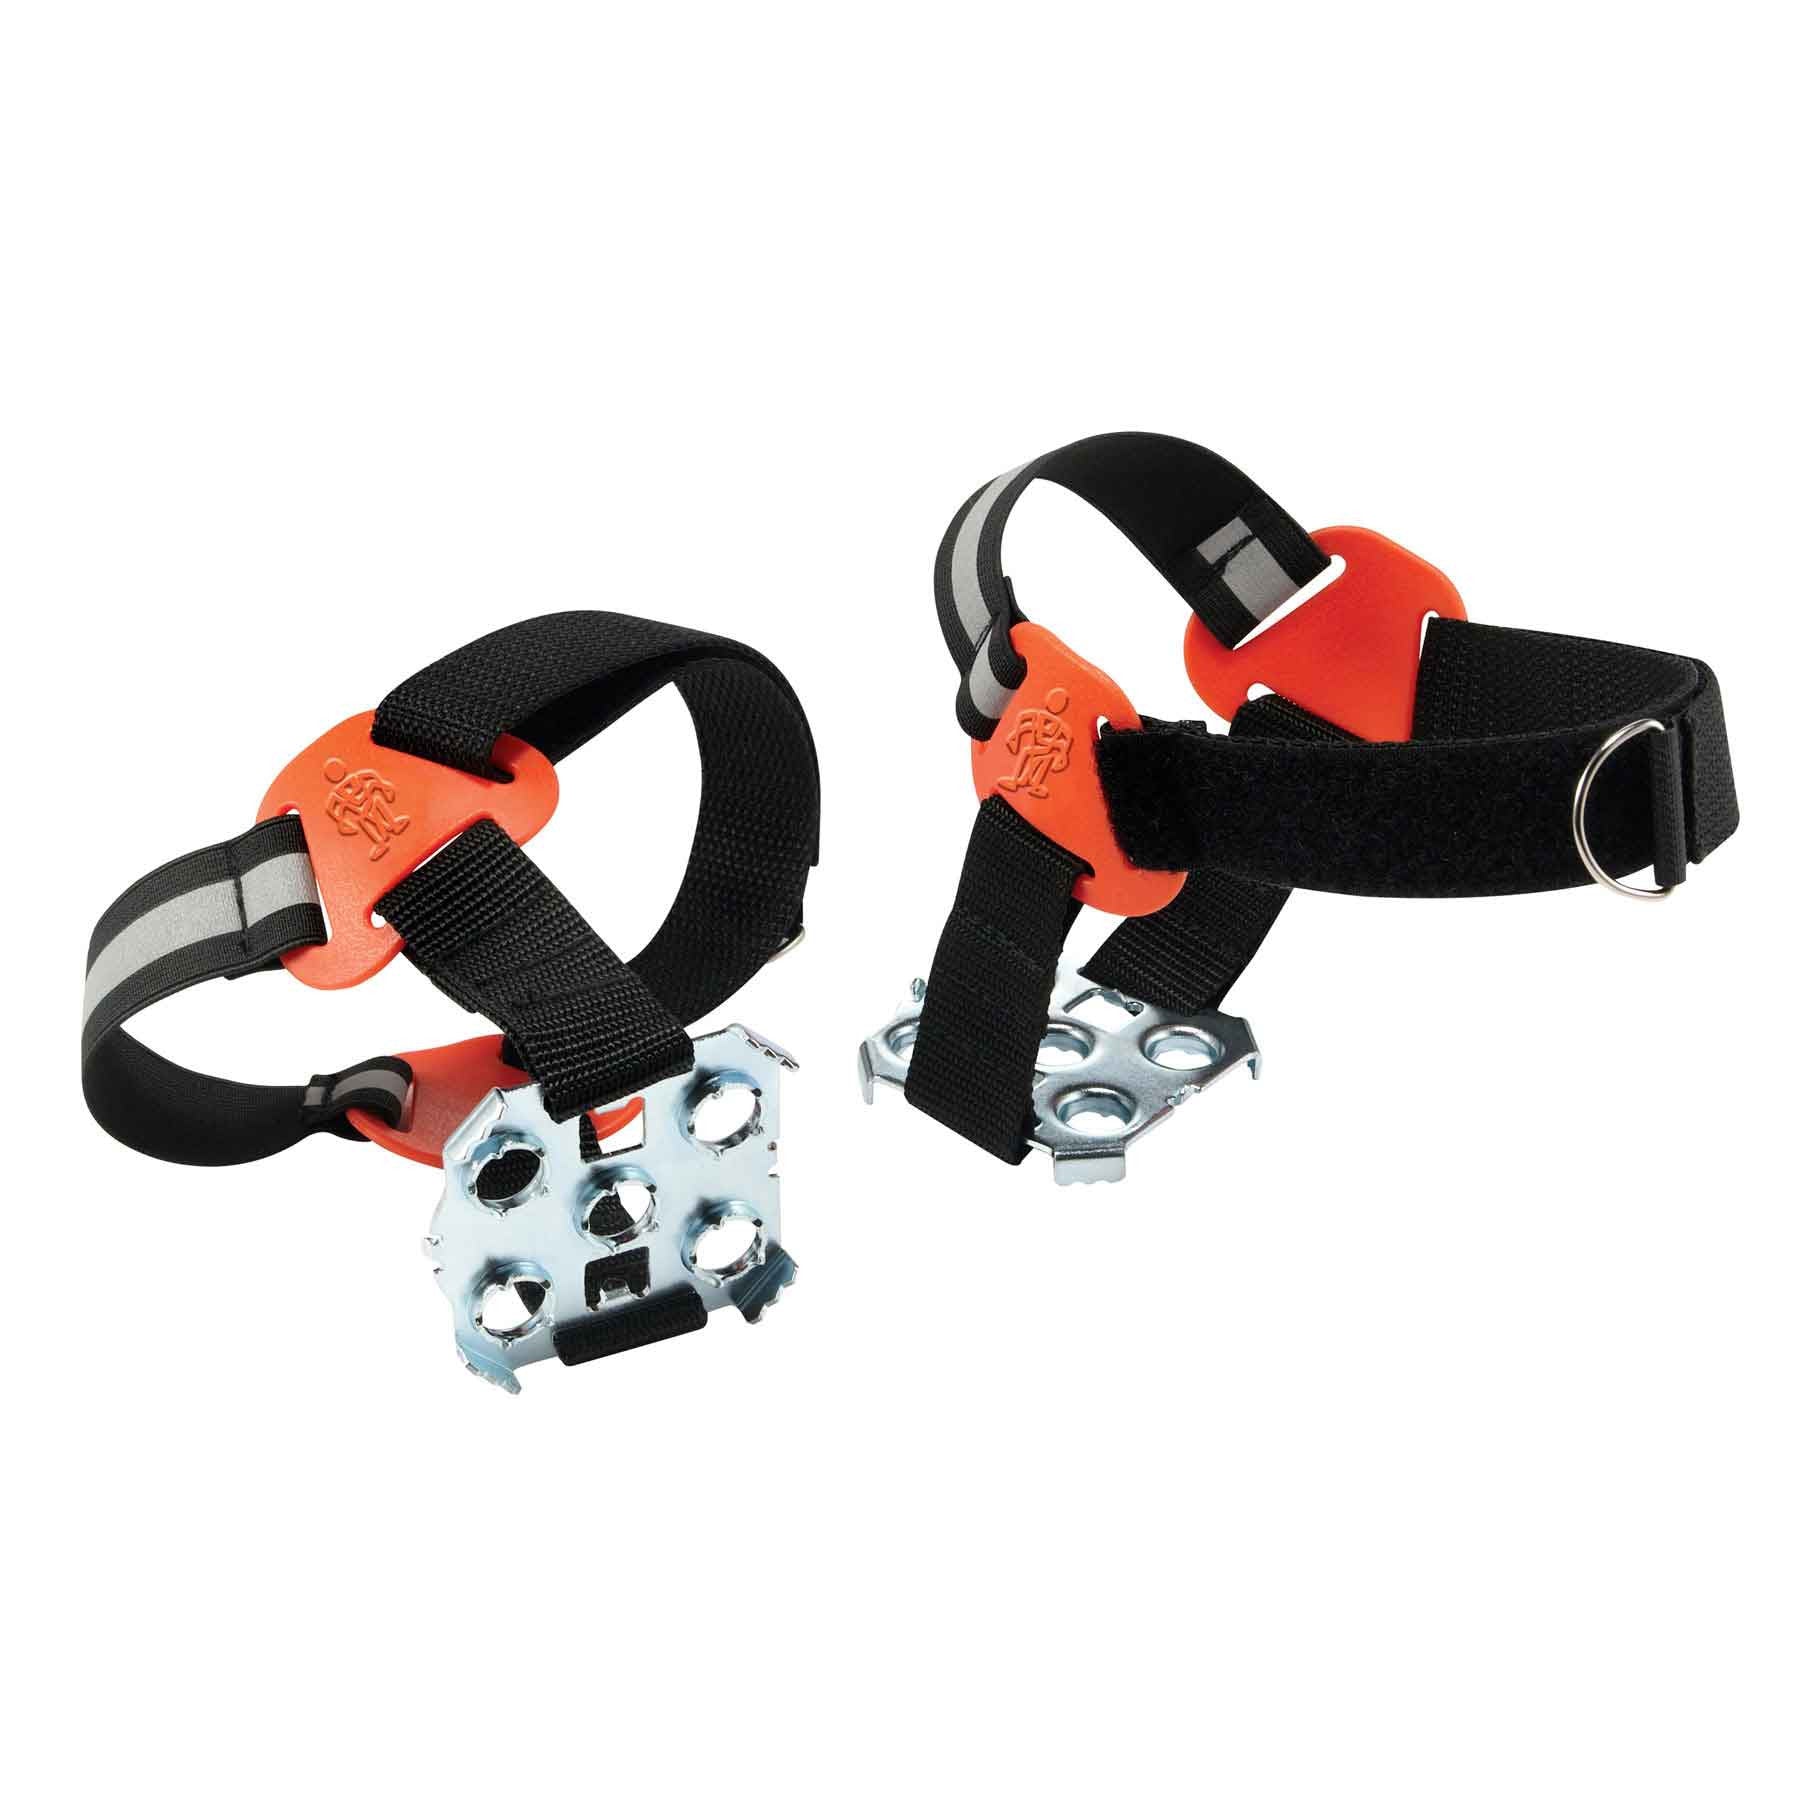 TREX 6315 Strap-On Heel Ice Traction Device-eSafety Supplies, Inc